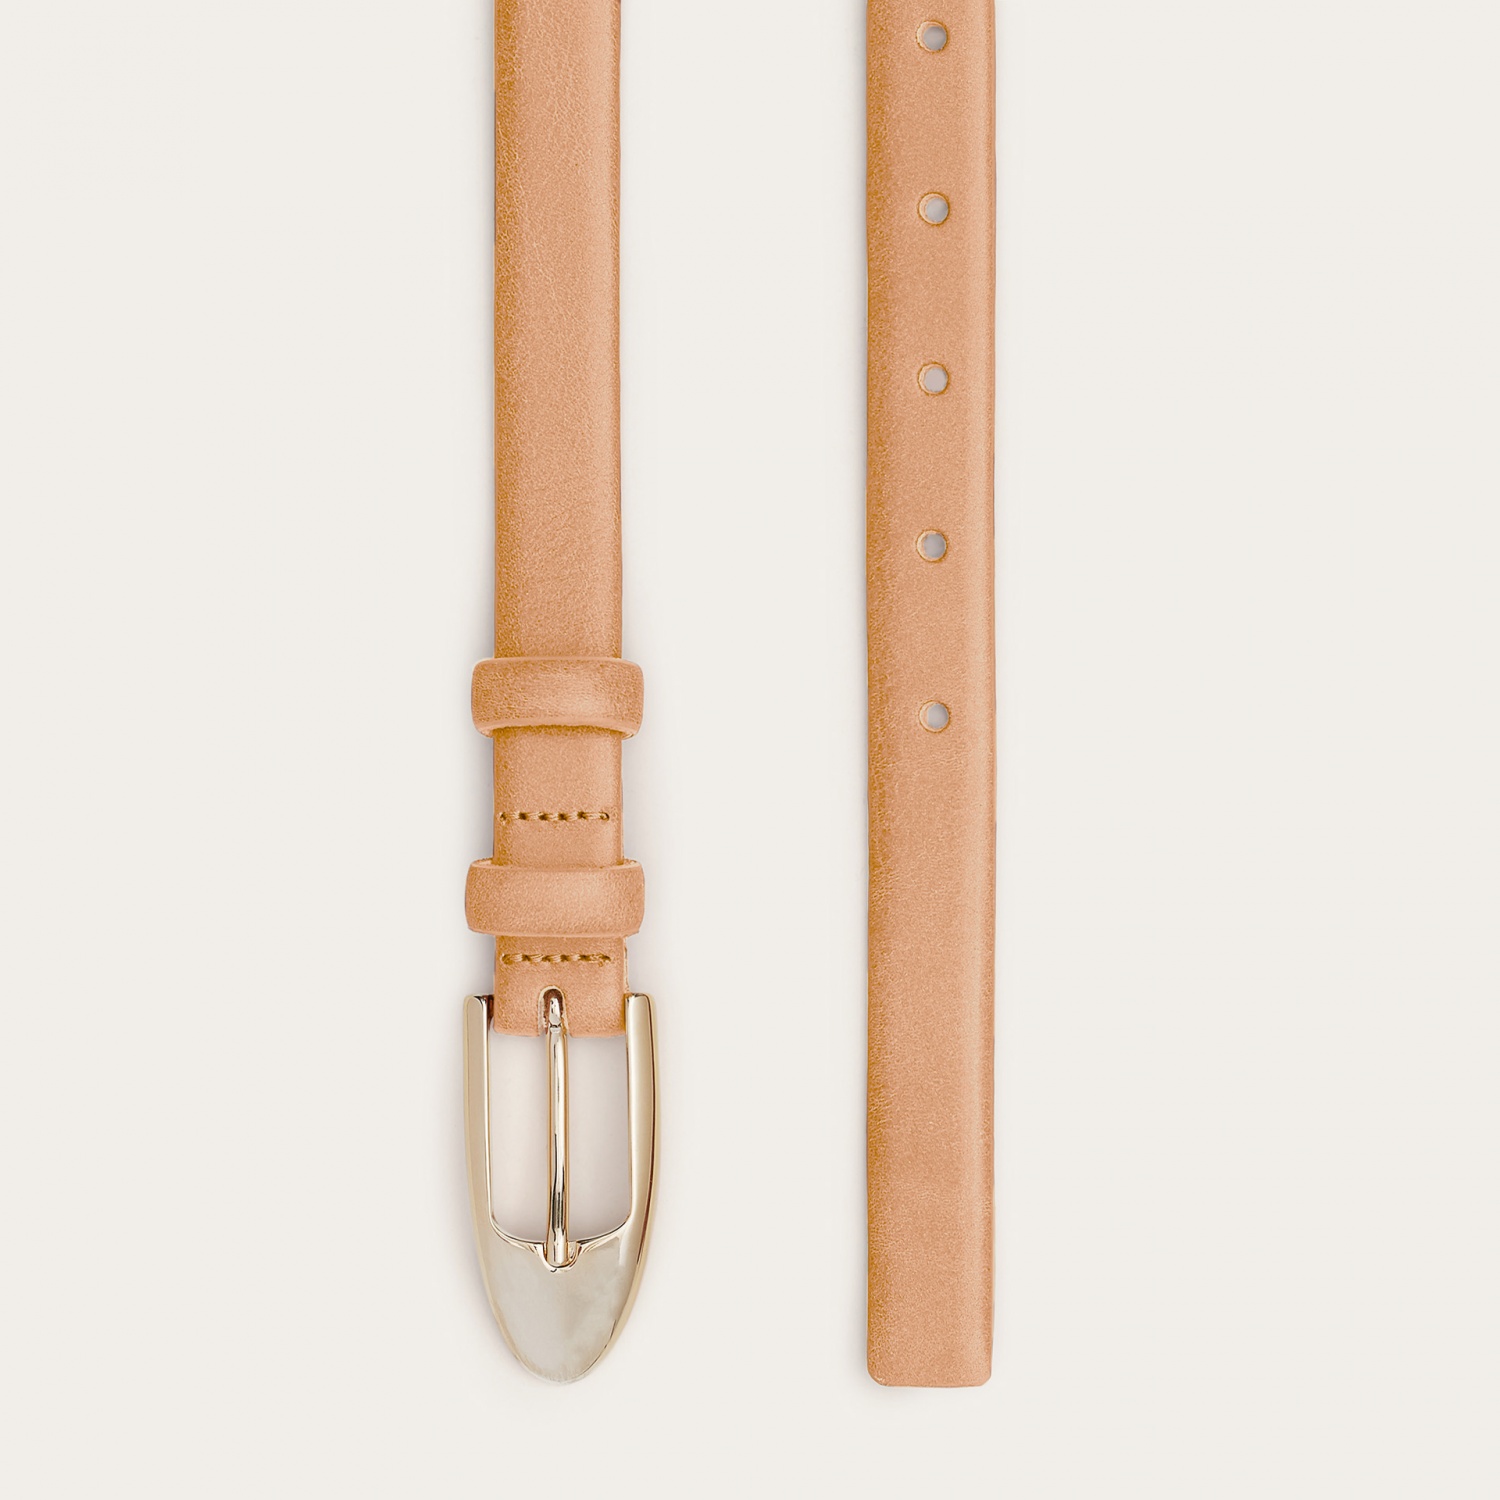  Thin belt with a buckle, natural-1 